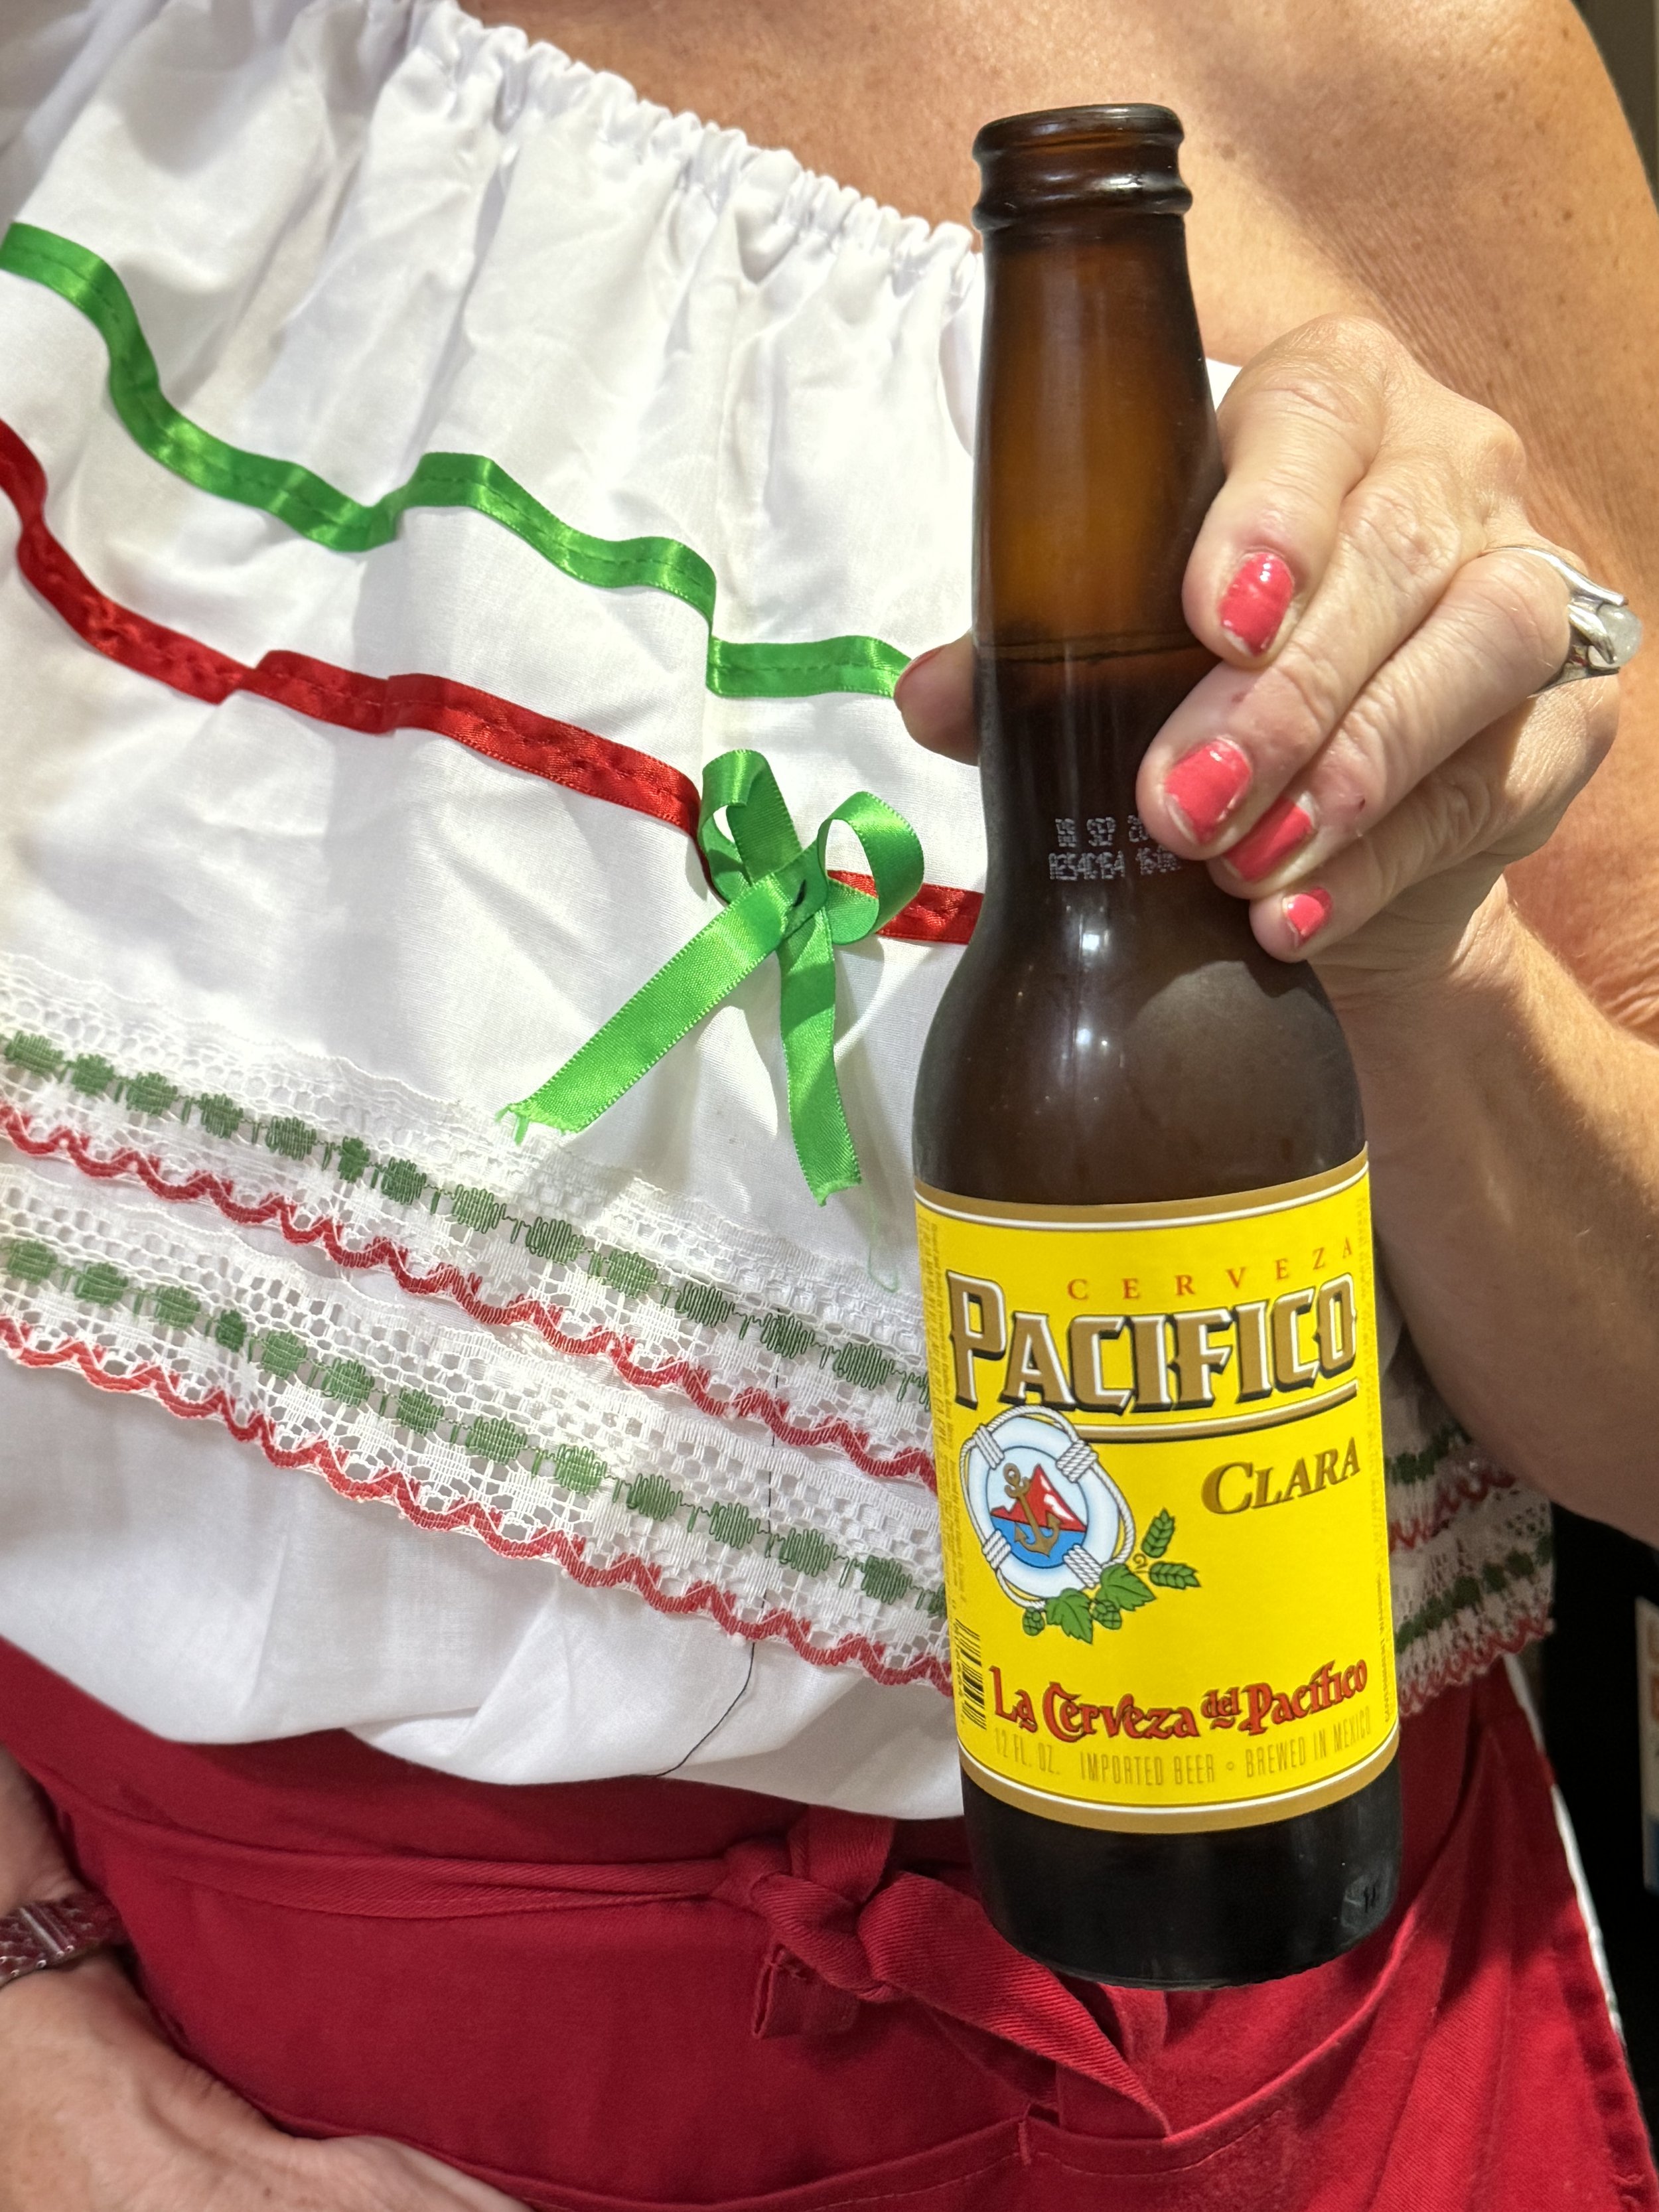 Pacifico - One of our imported Mexican beers